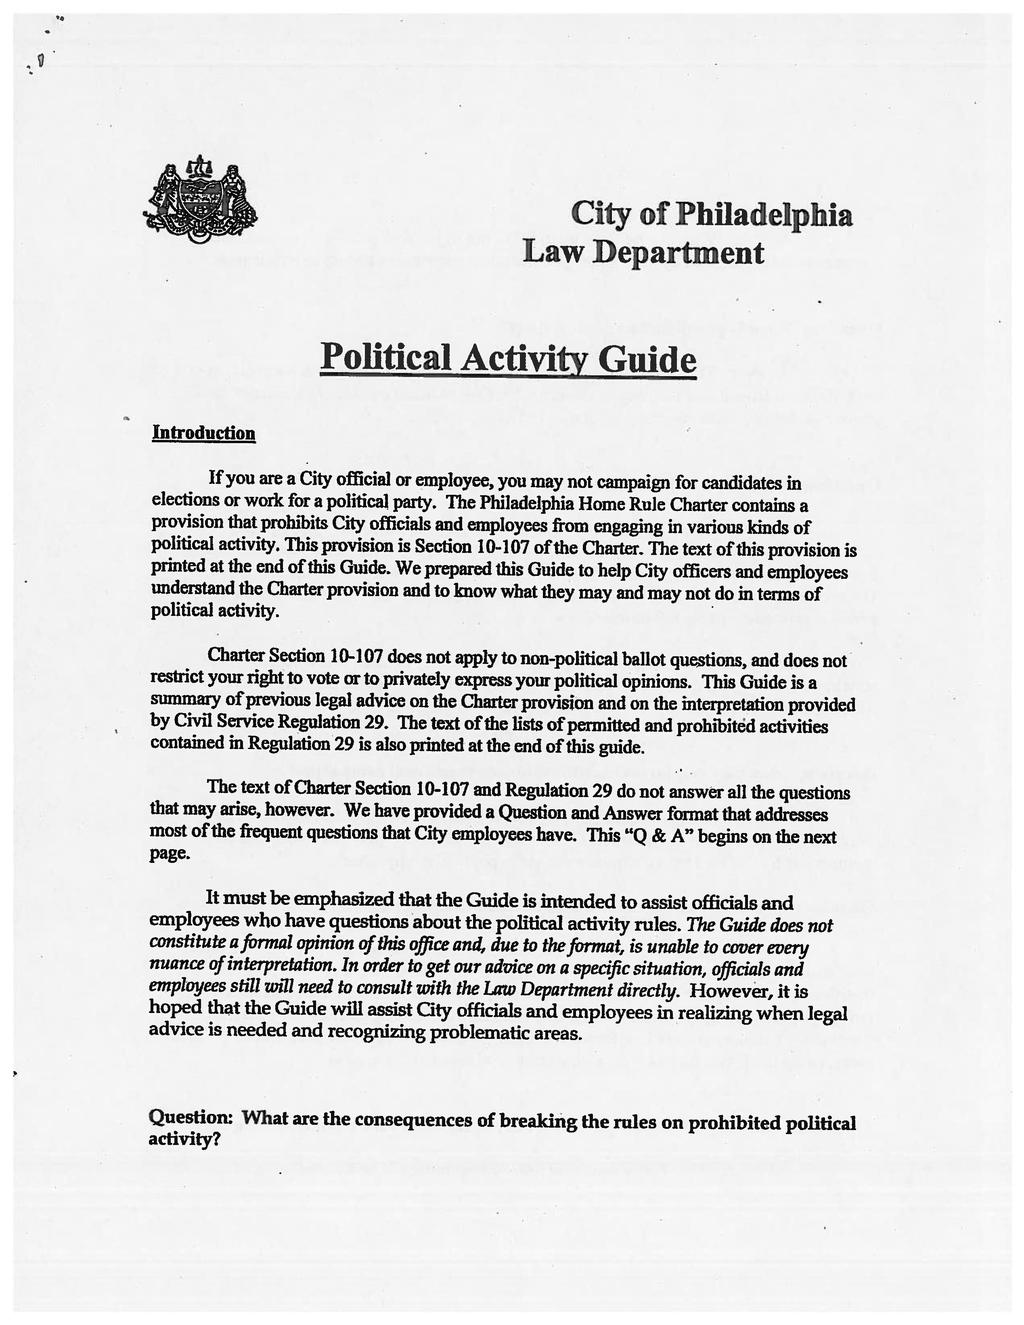 City of Philadelphia Law Department Political Activity Guide Introduction If you are a City of licial or employee, you may not campaign for candidates in elections or work for a political party.